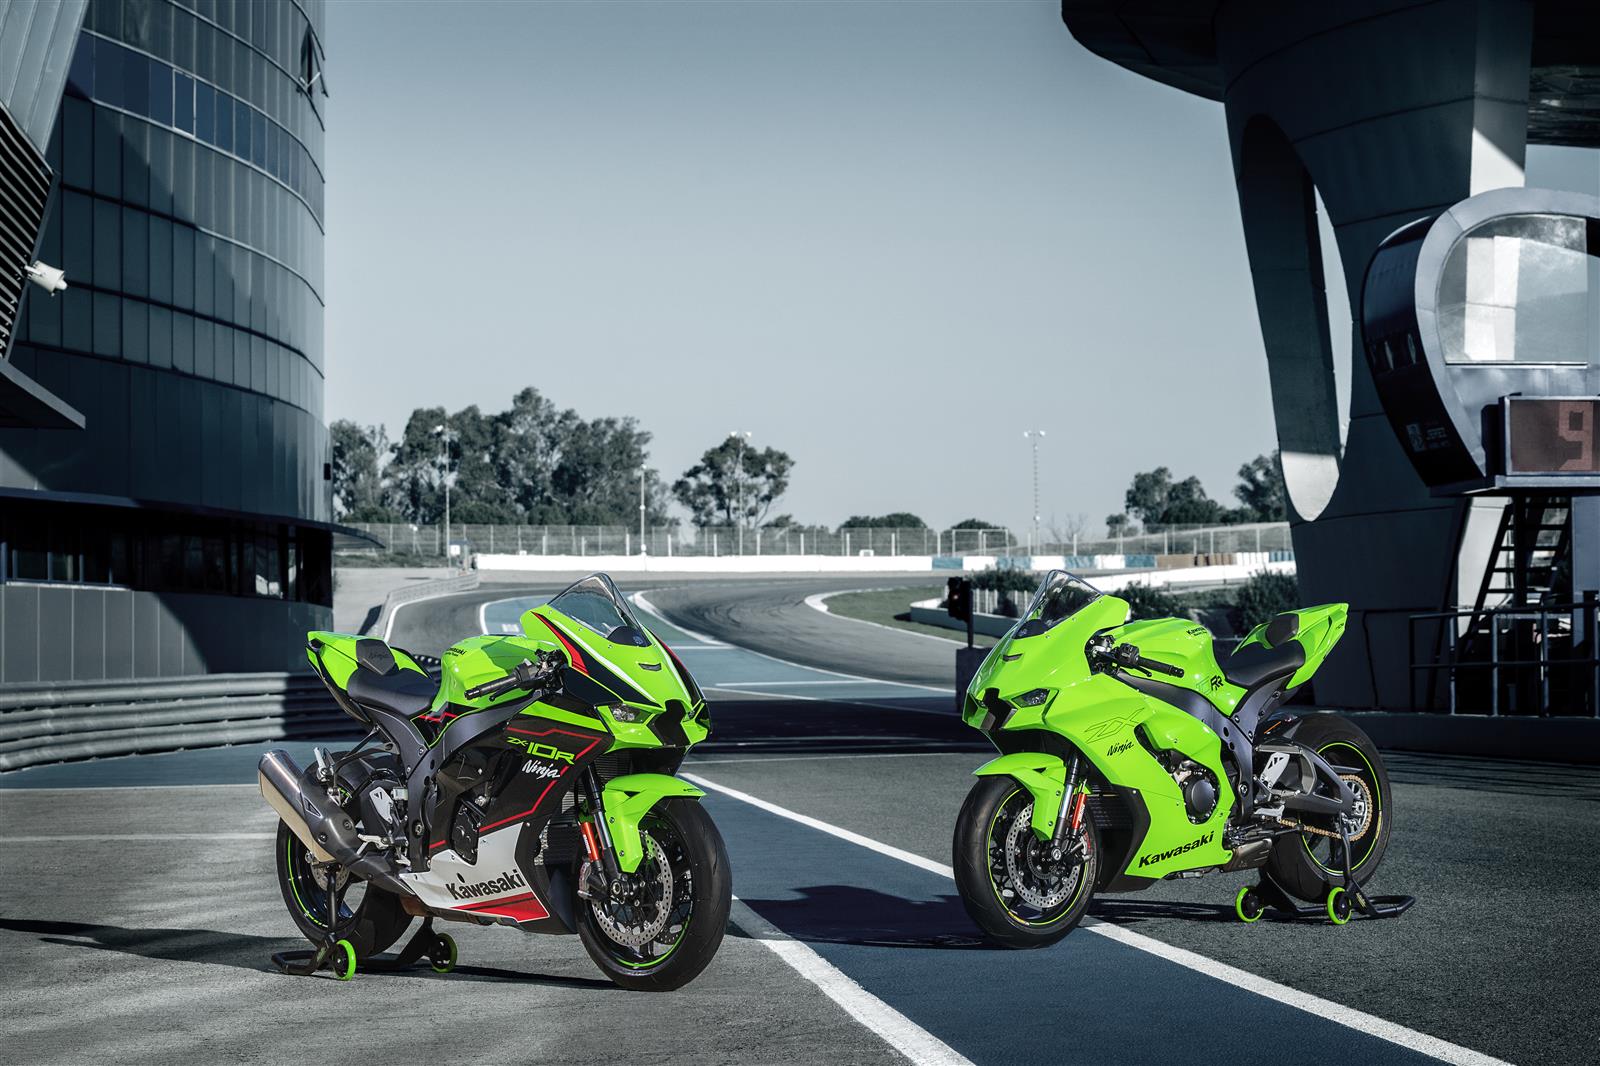 2022 Ninja ZX-10R and ZX-10RR: From A to Z